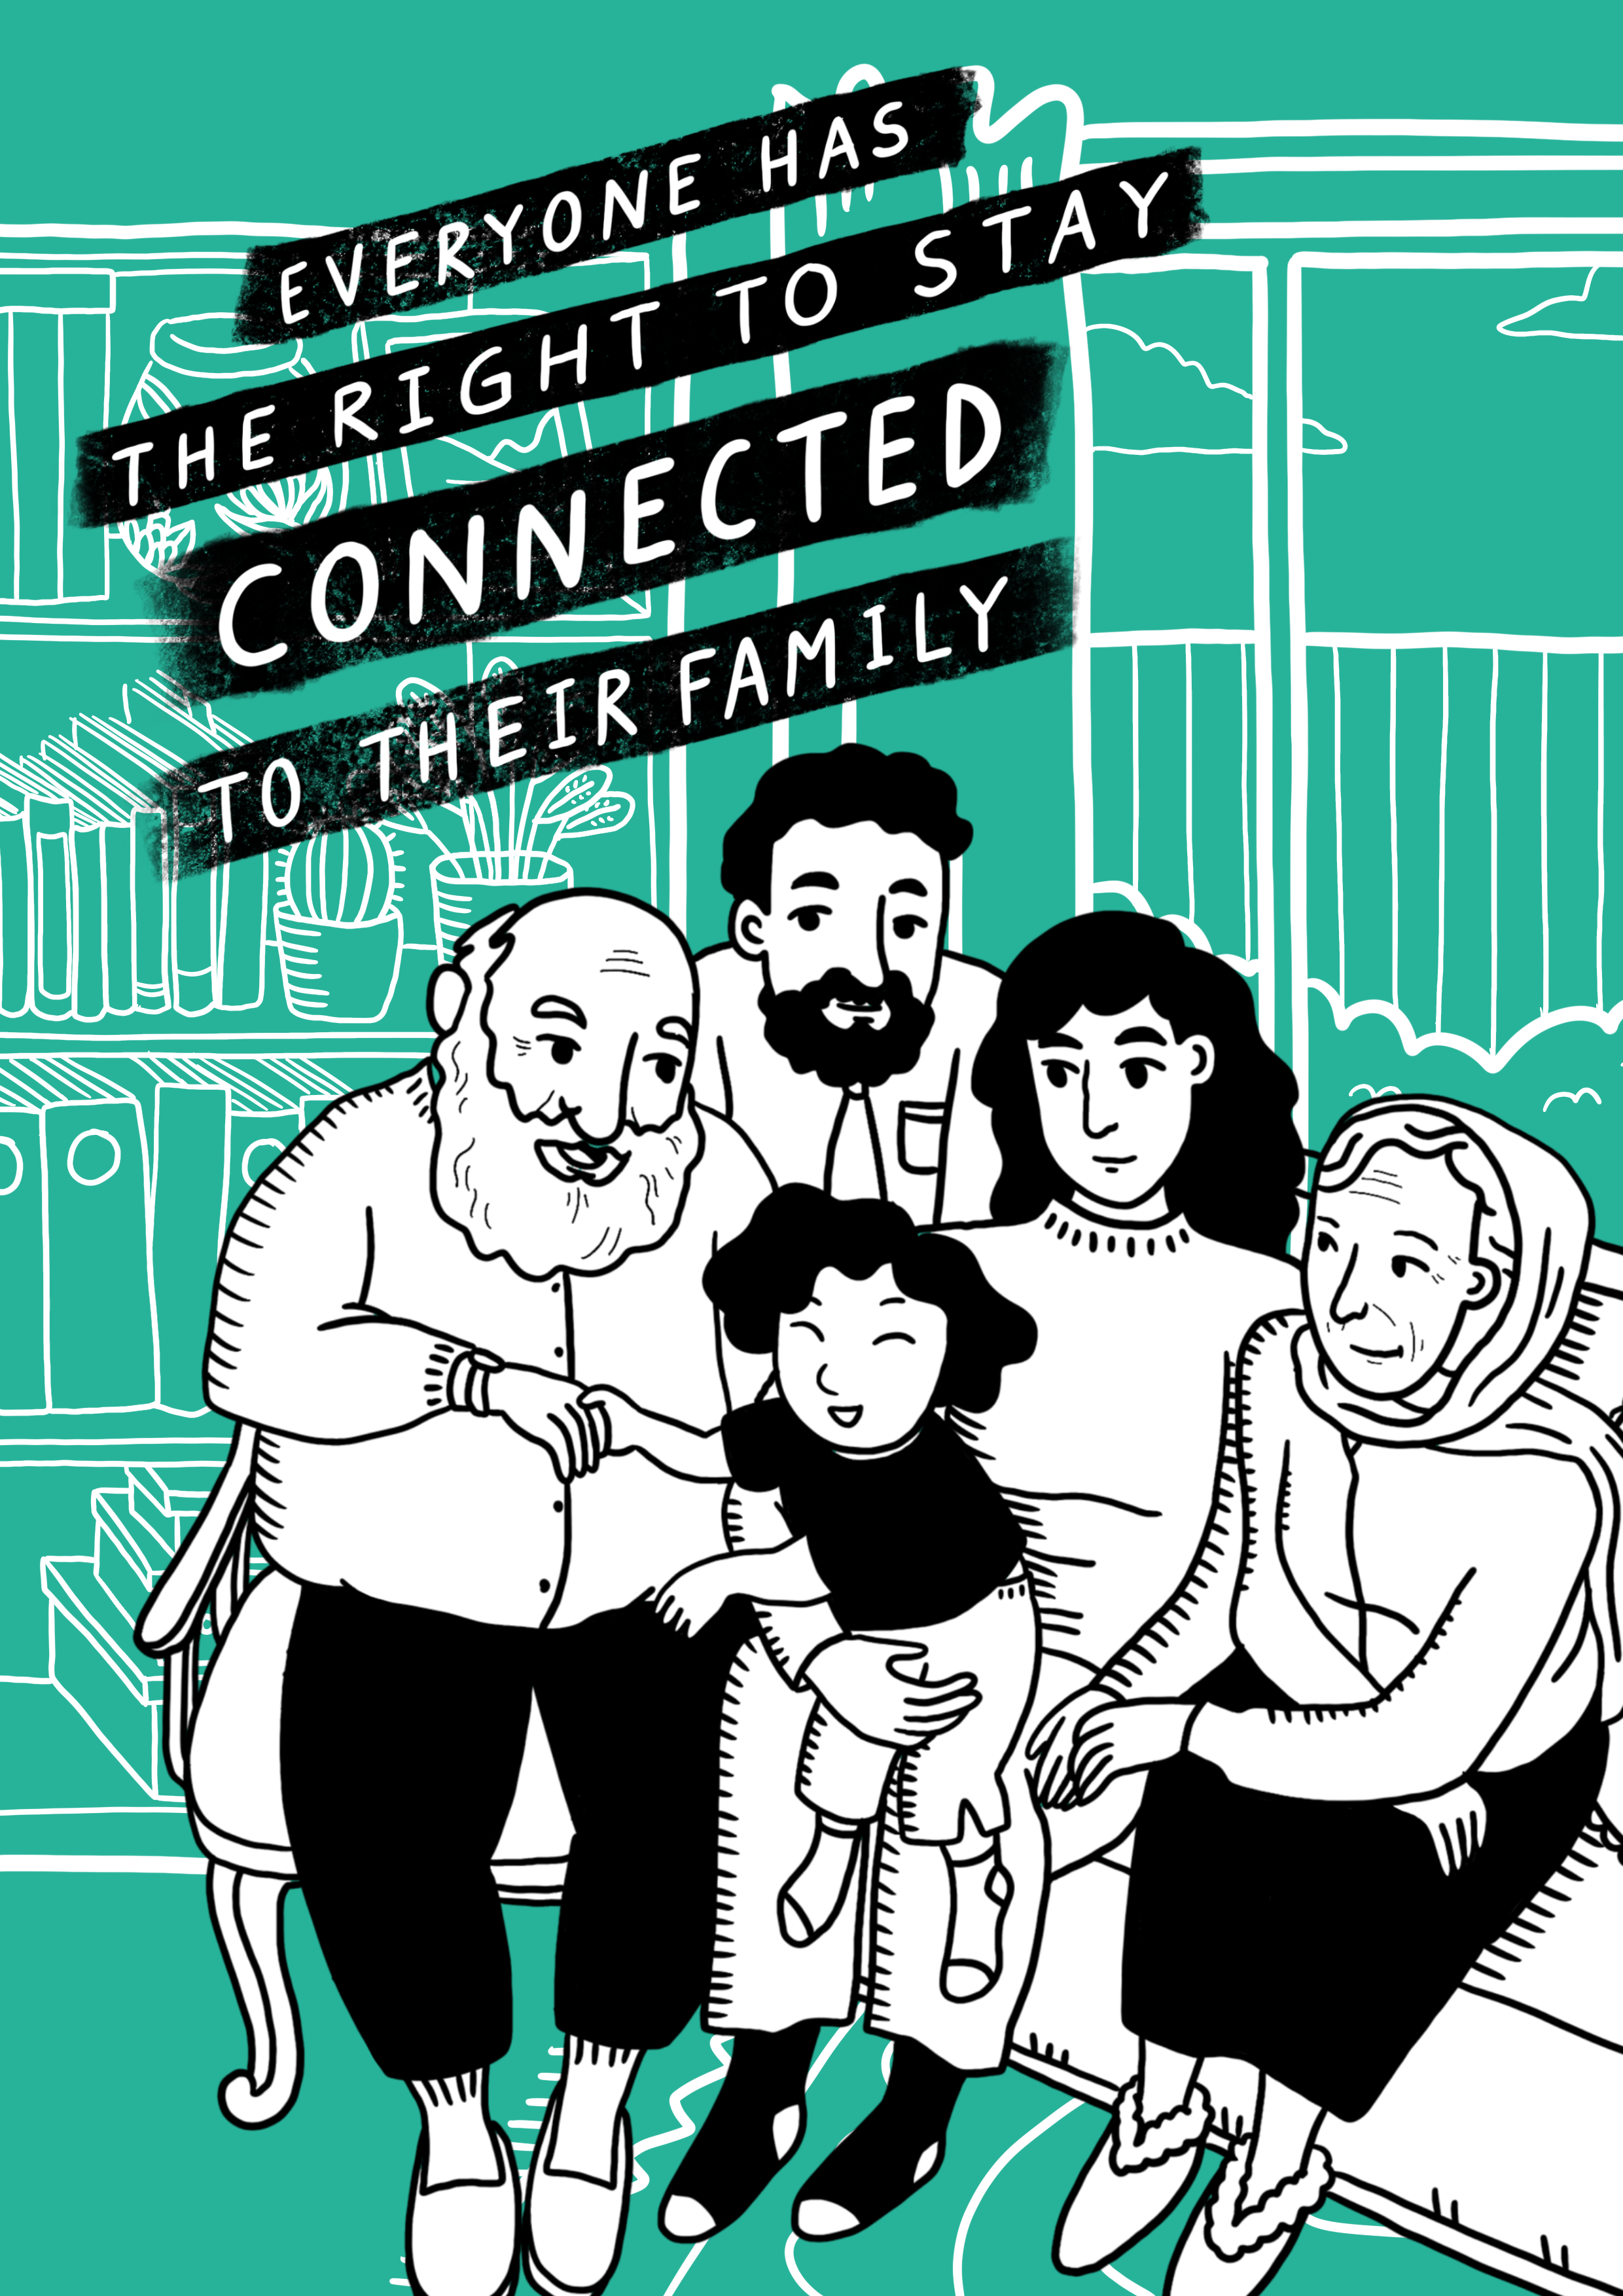 Artwork by Judy Kuo showing a family of migrants, with the text 'everyone has the right to stay connected to their family.